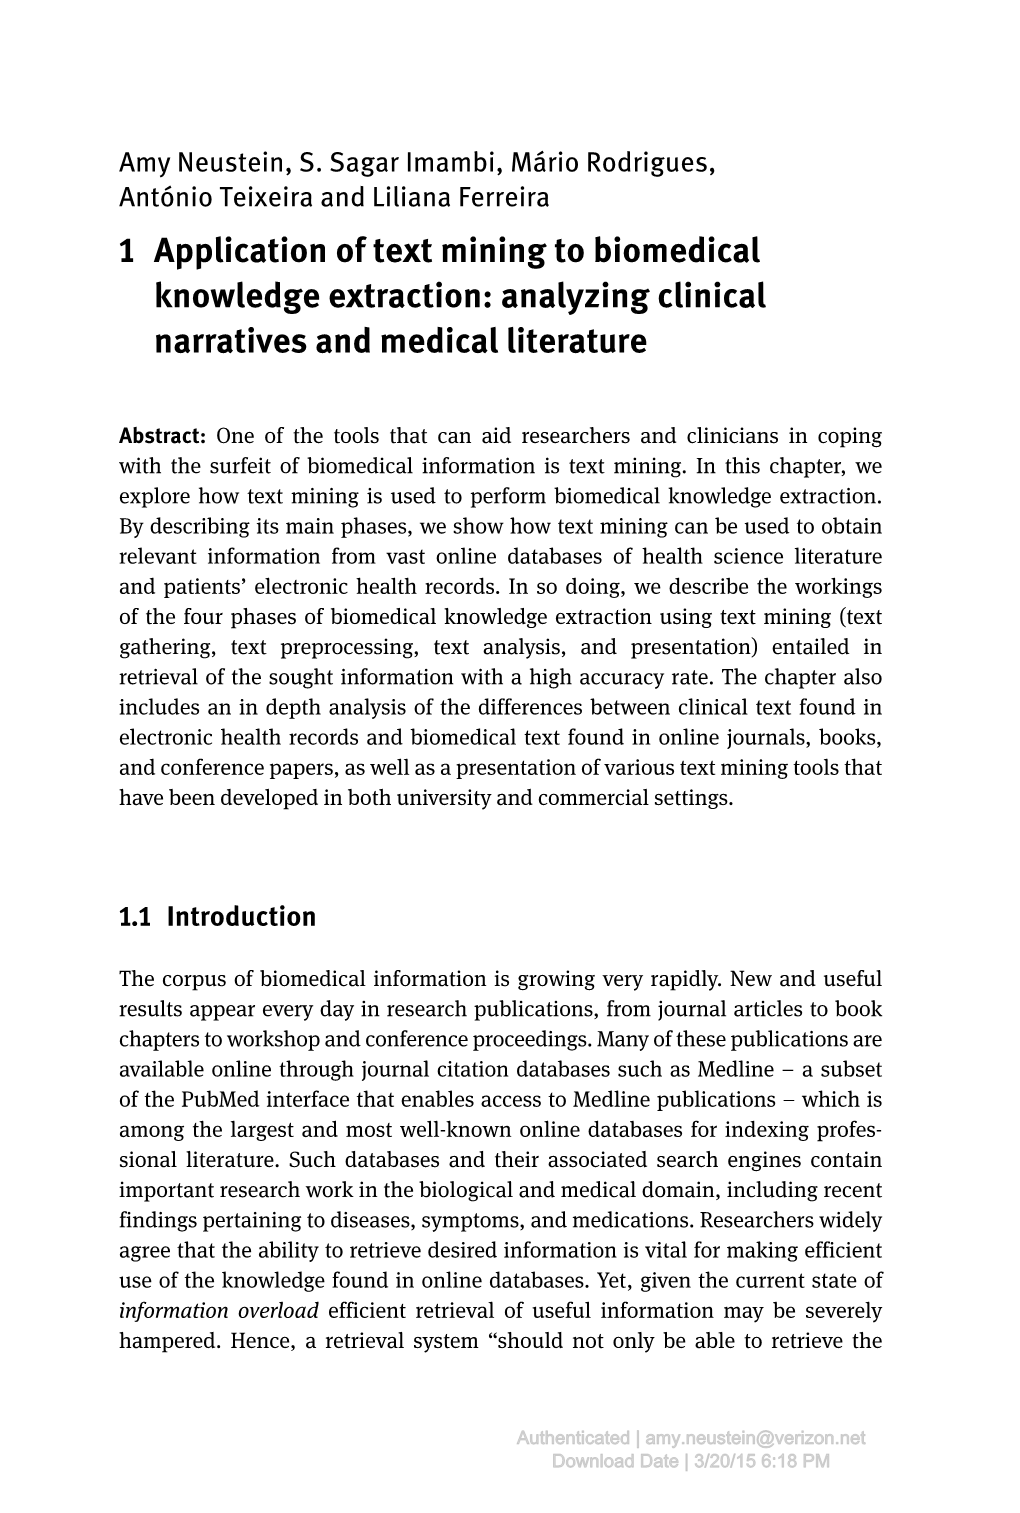 1 Application of Text Mining to Biomedical Knowledge Extraction: Analyzing Clinical Narratives and Medical Literature